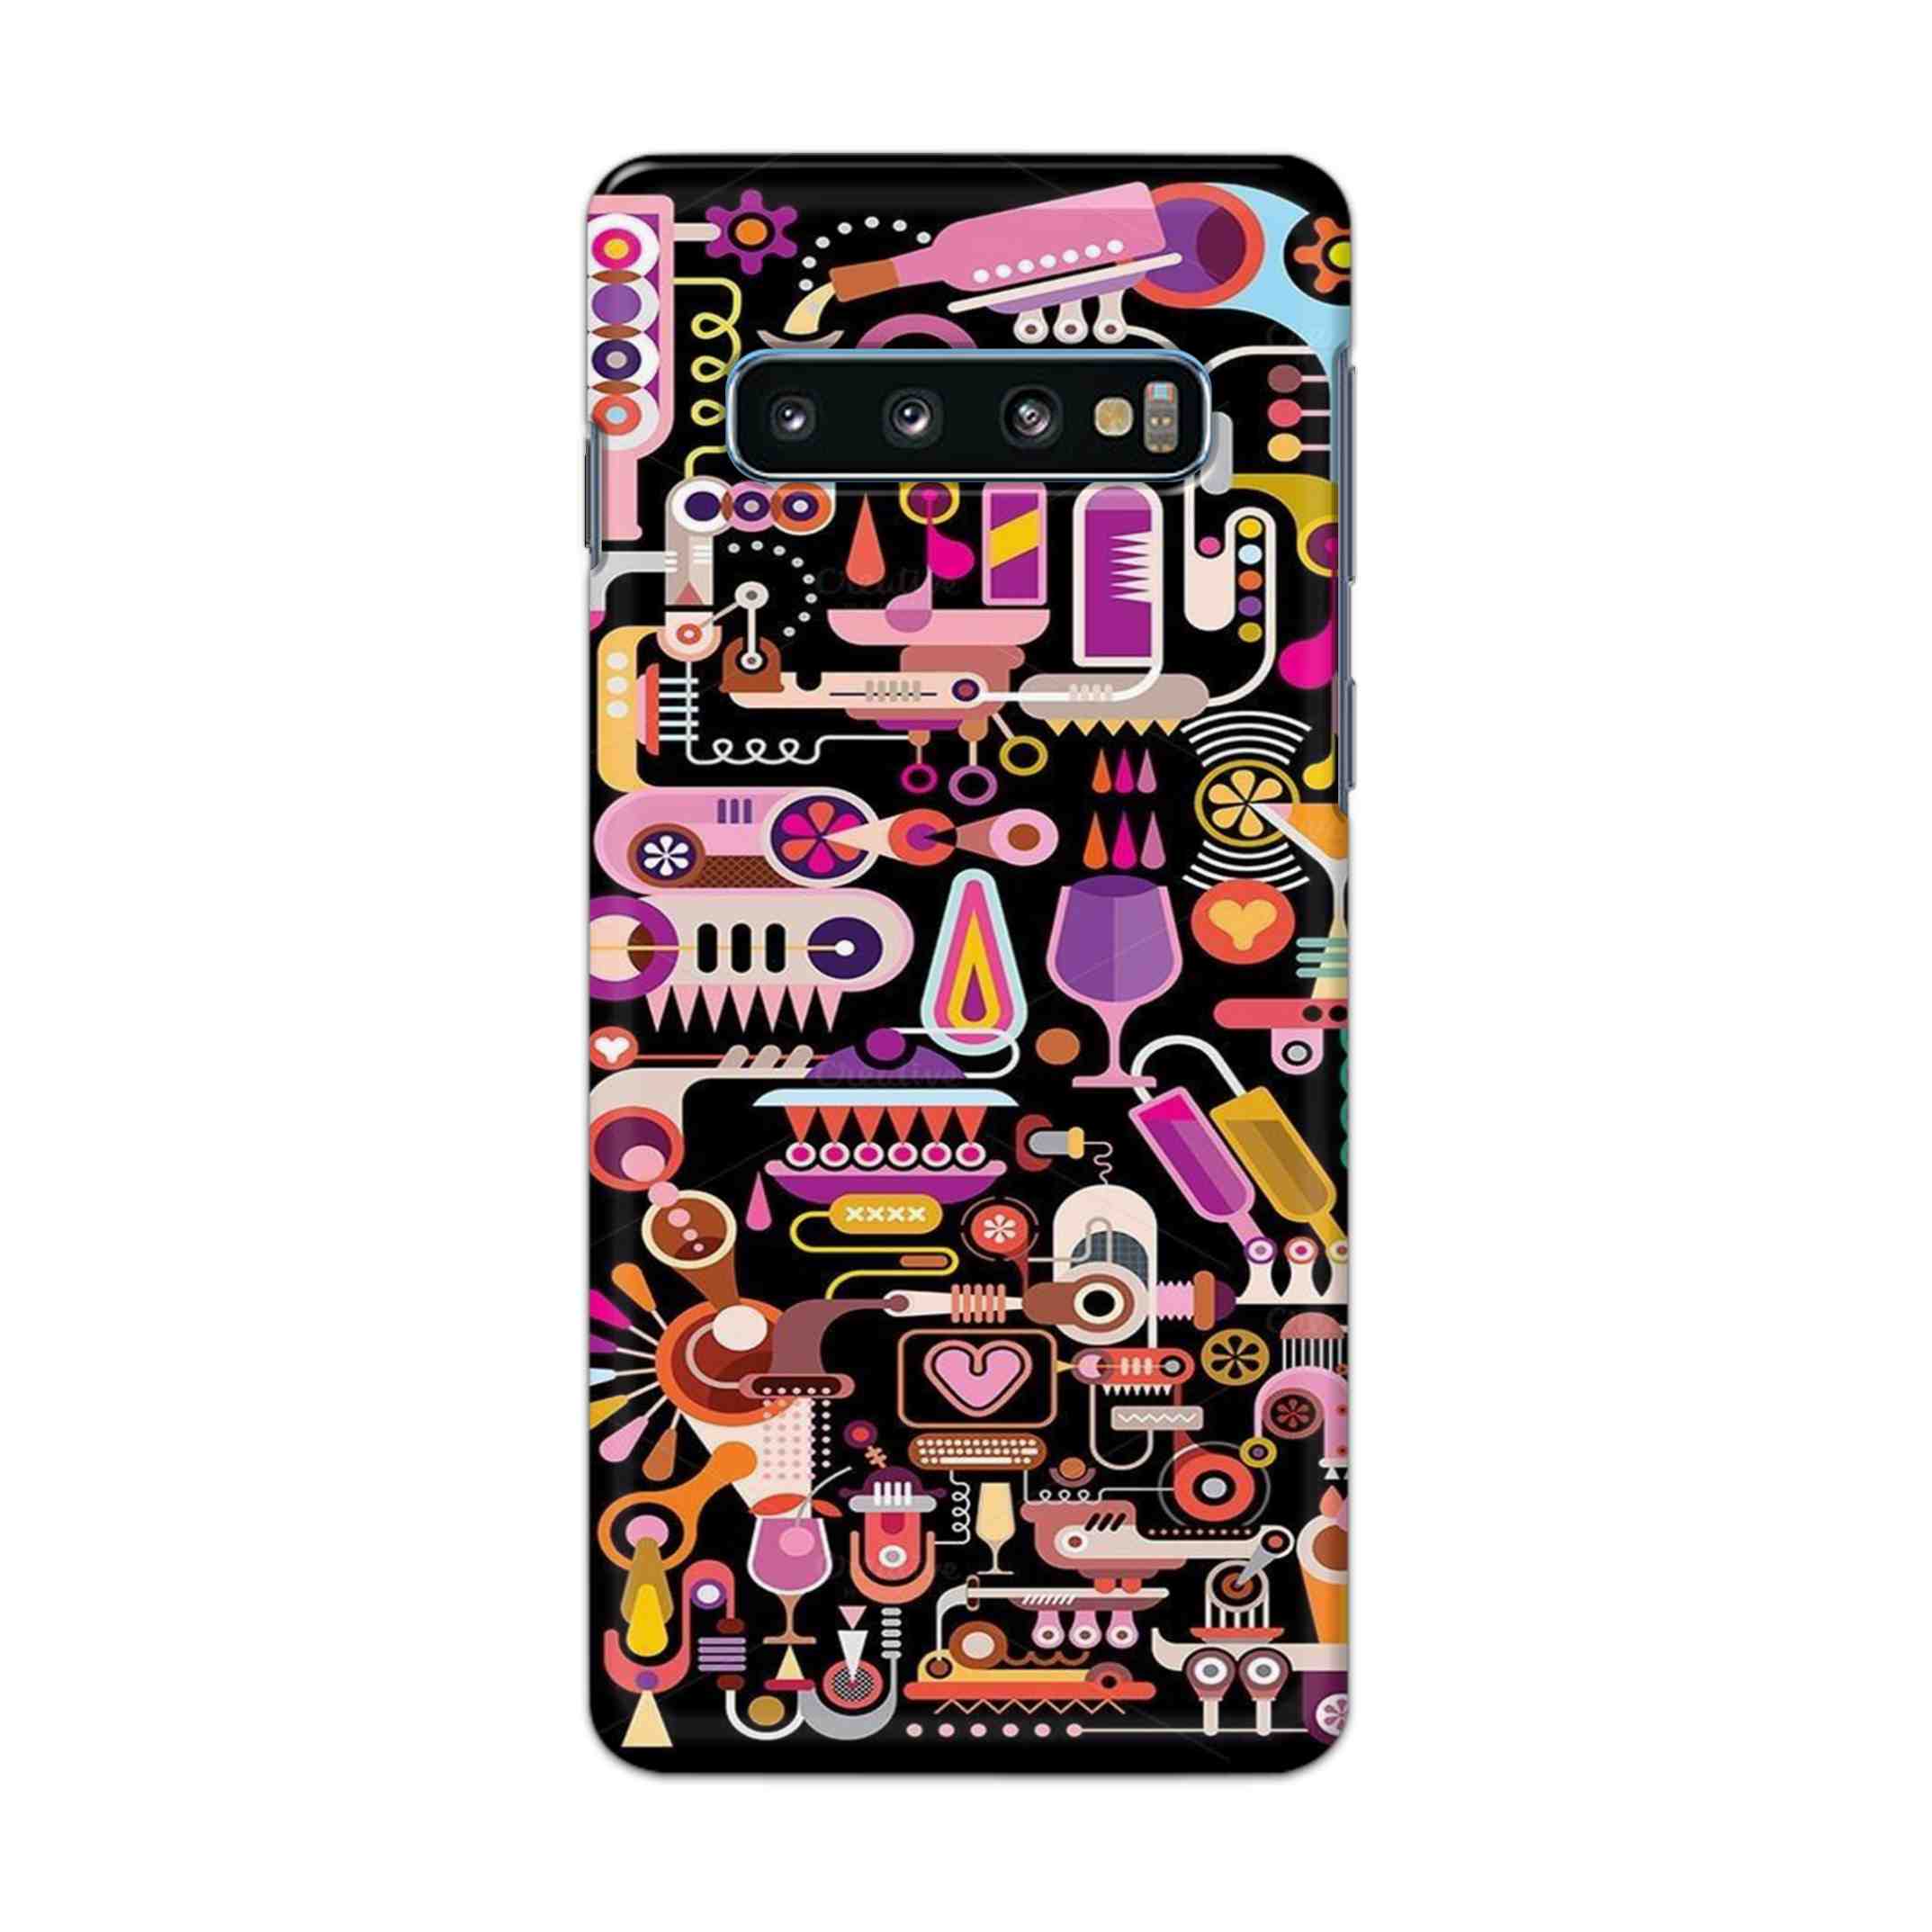 Buy Lab Art Hard Back Mobile Phone Case Cover For Samsung Galaxy S10 Plus Online